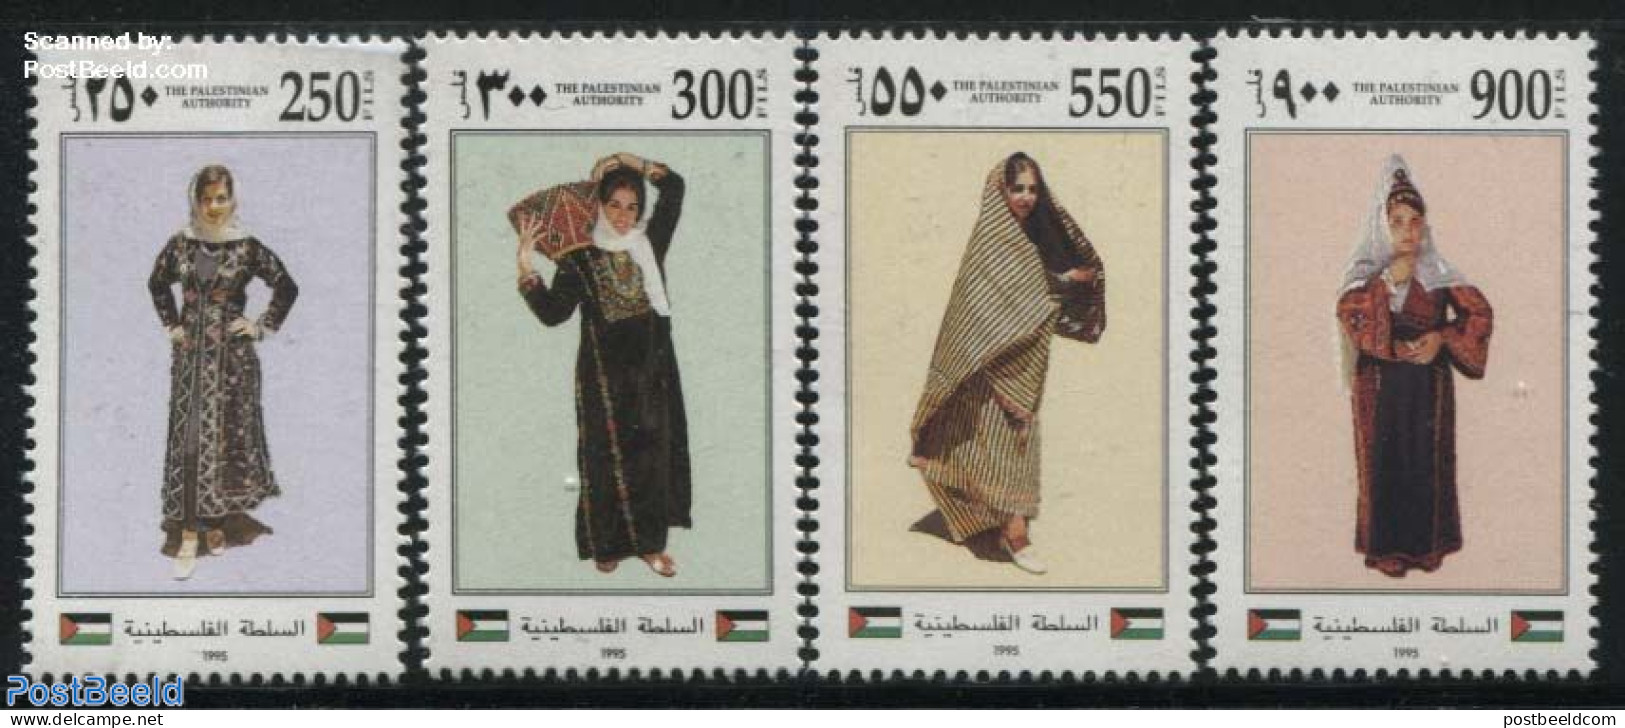 Palestinian Terr. 1995 Costumes 4v, Mint NH, Various - Costumes - Costumes